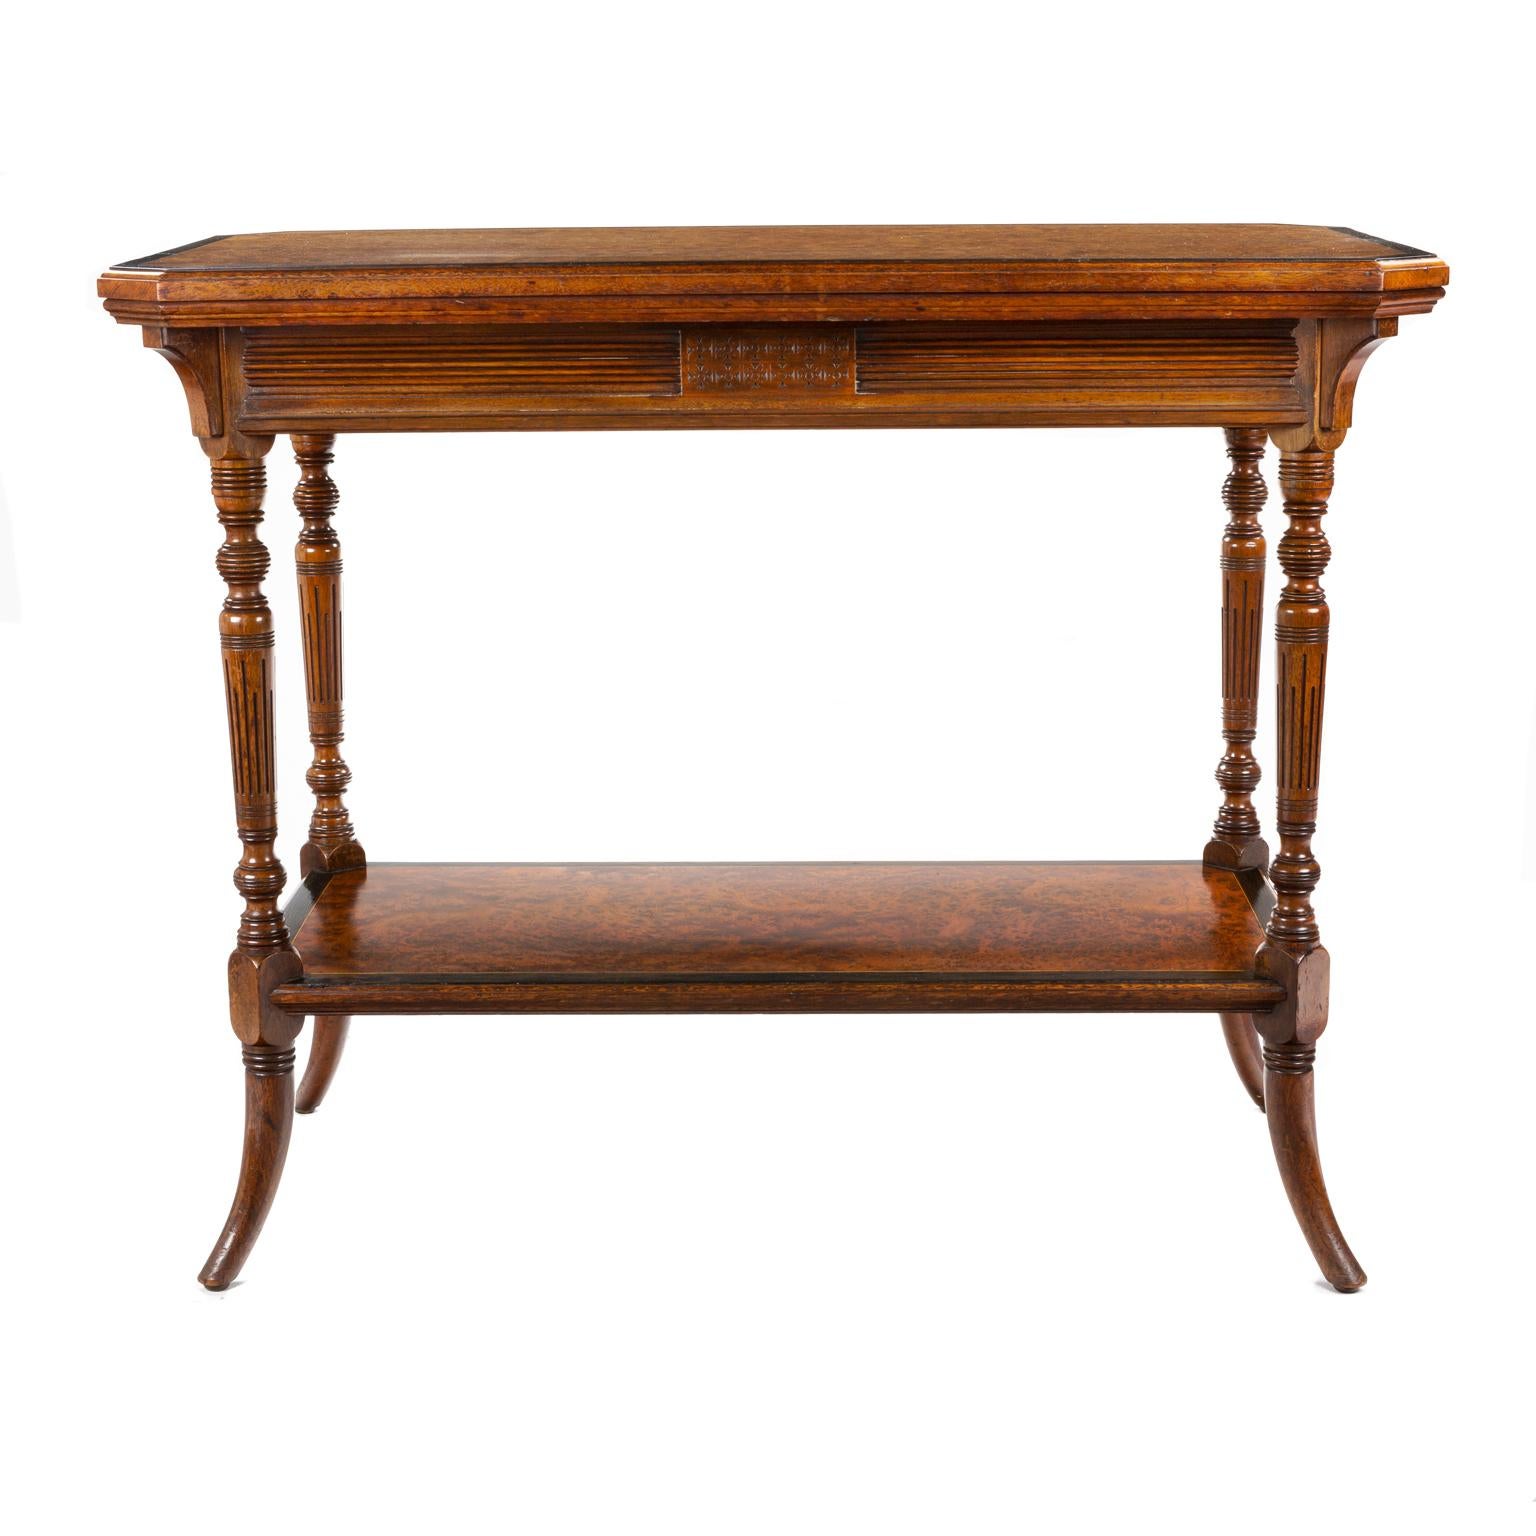 British Gillows Late 19th Century Aesthetic Movement Table For Sale